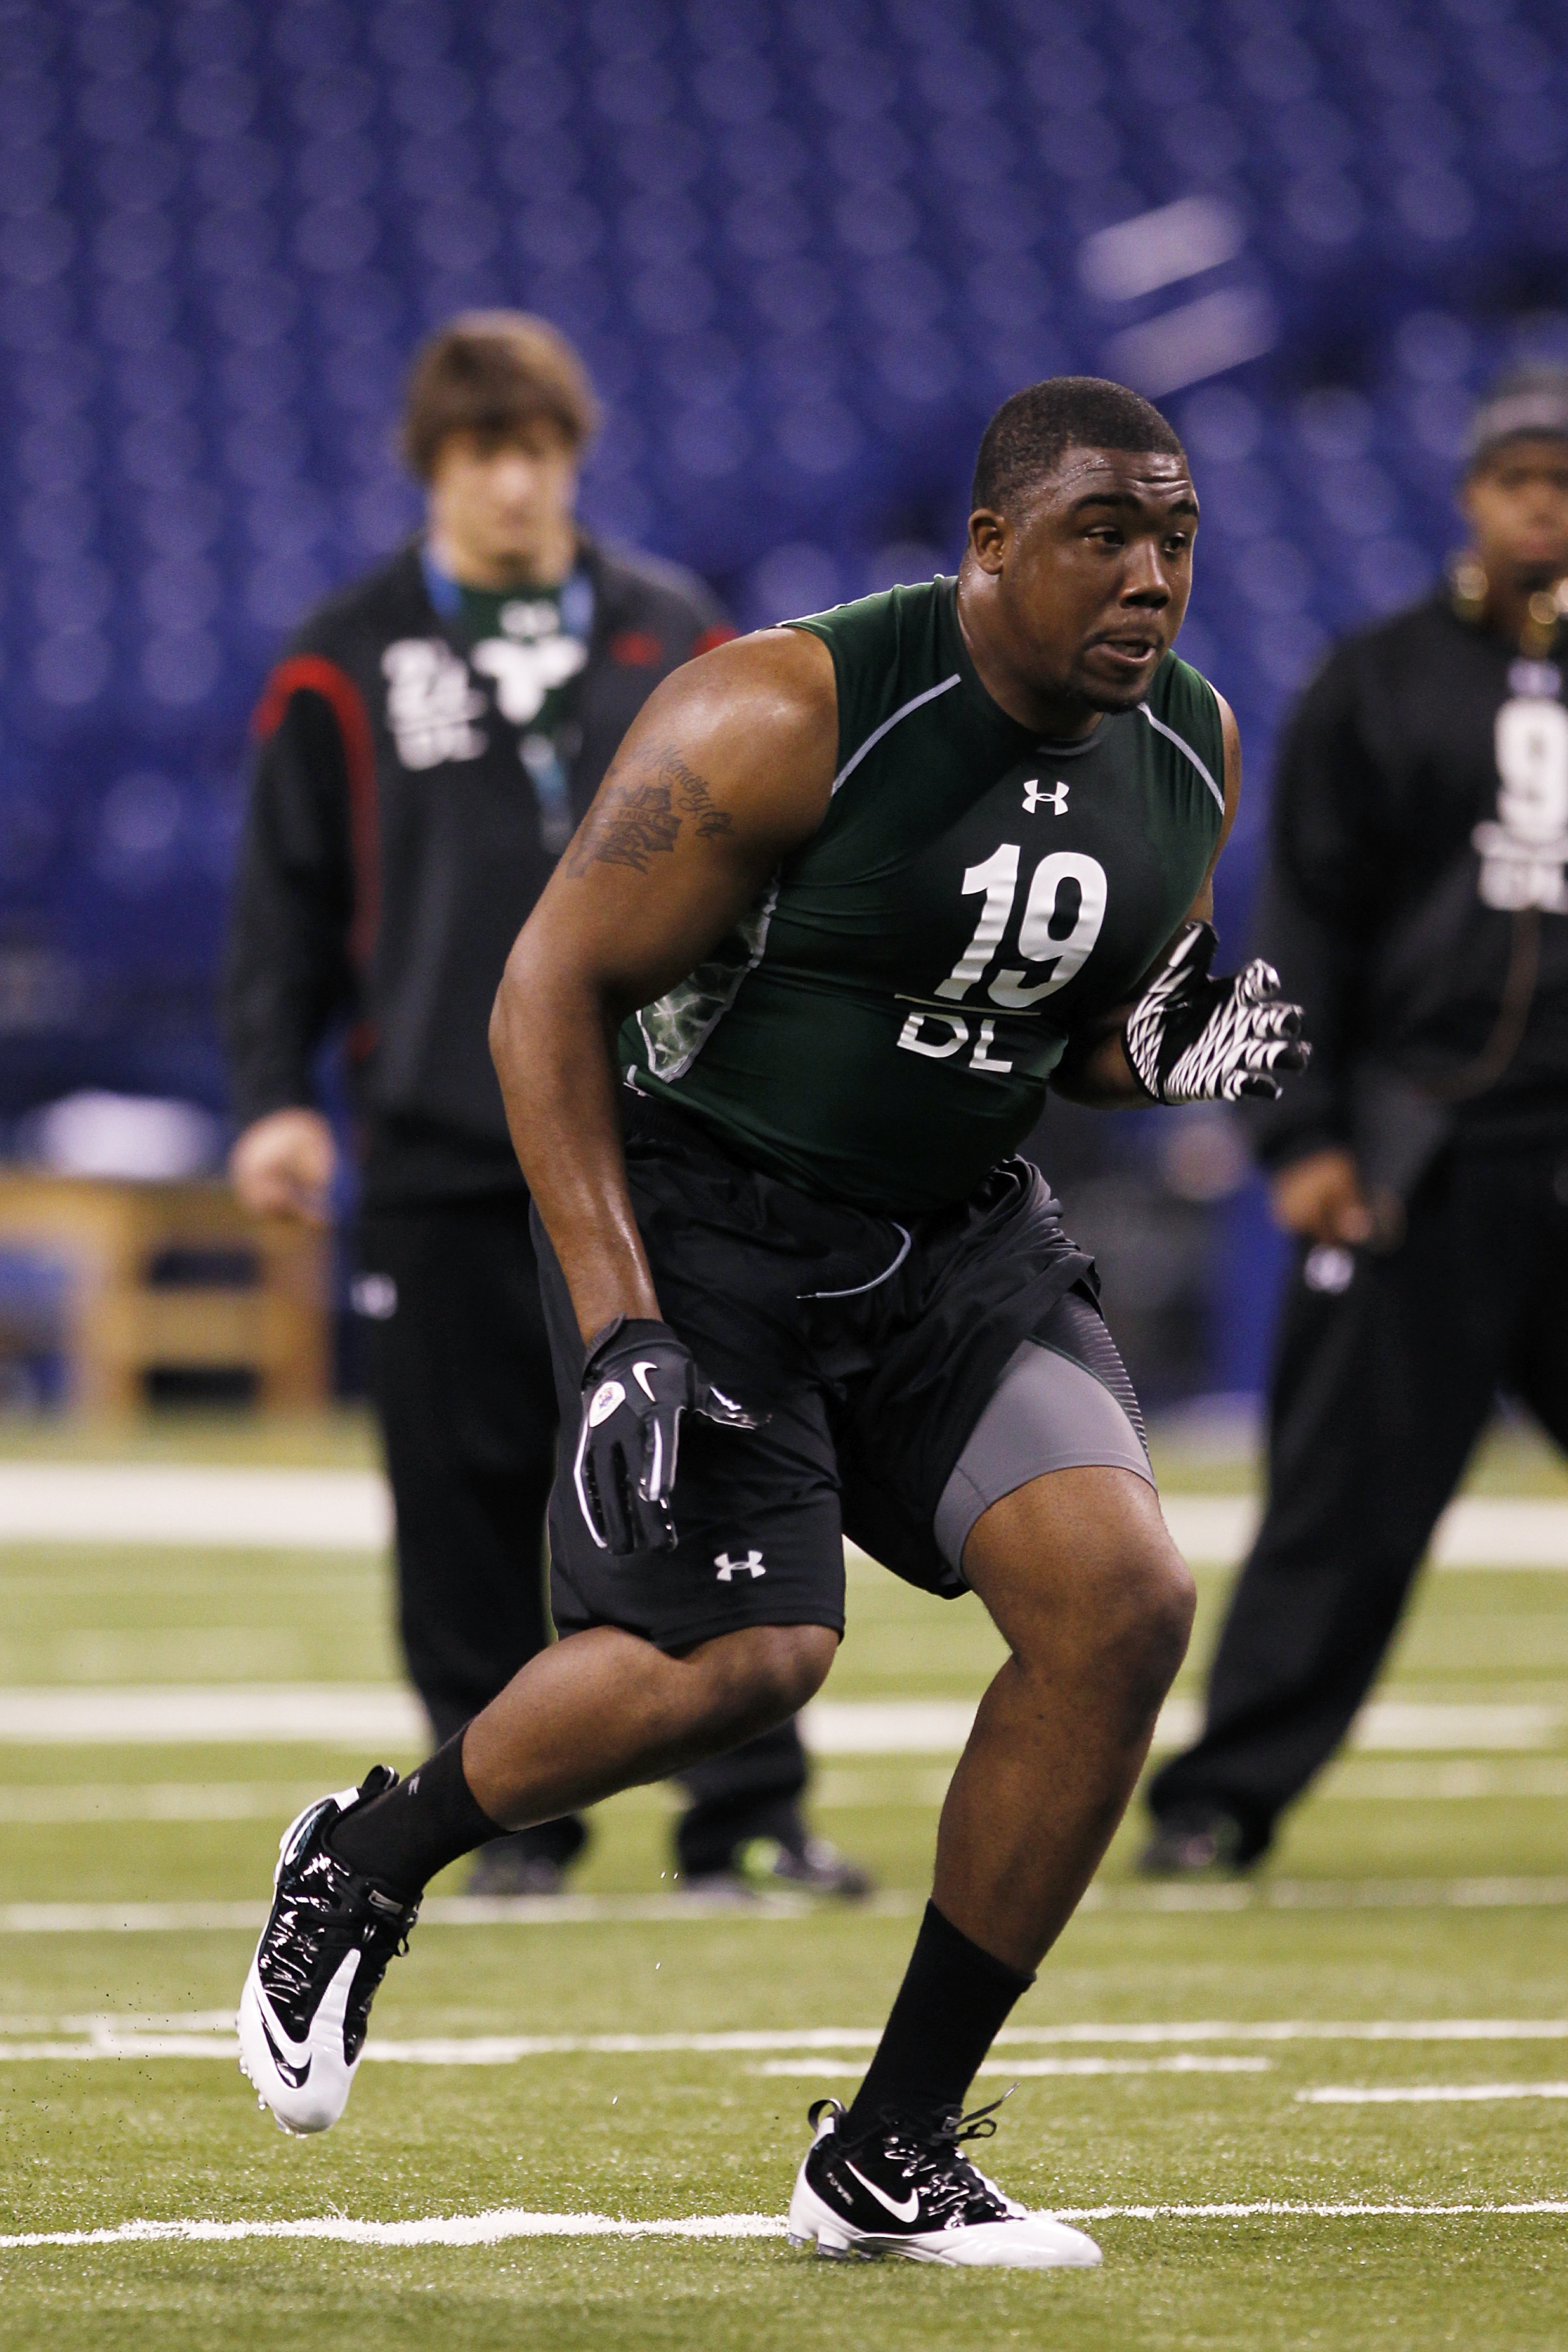 INDIANAPOLIS, IN - FEBRUARY 28:  Defensive lineman Nick Fairley of Auburn runs a drill during the 2011 NFL Scouting Combine at Lucas Oil Stadium on February 28, 2011 in Indianapolis, Indiana. (Photo by Joe Robbins/Getty Images)